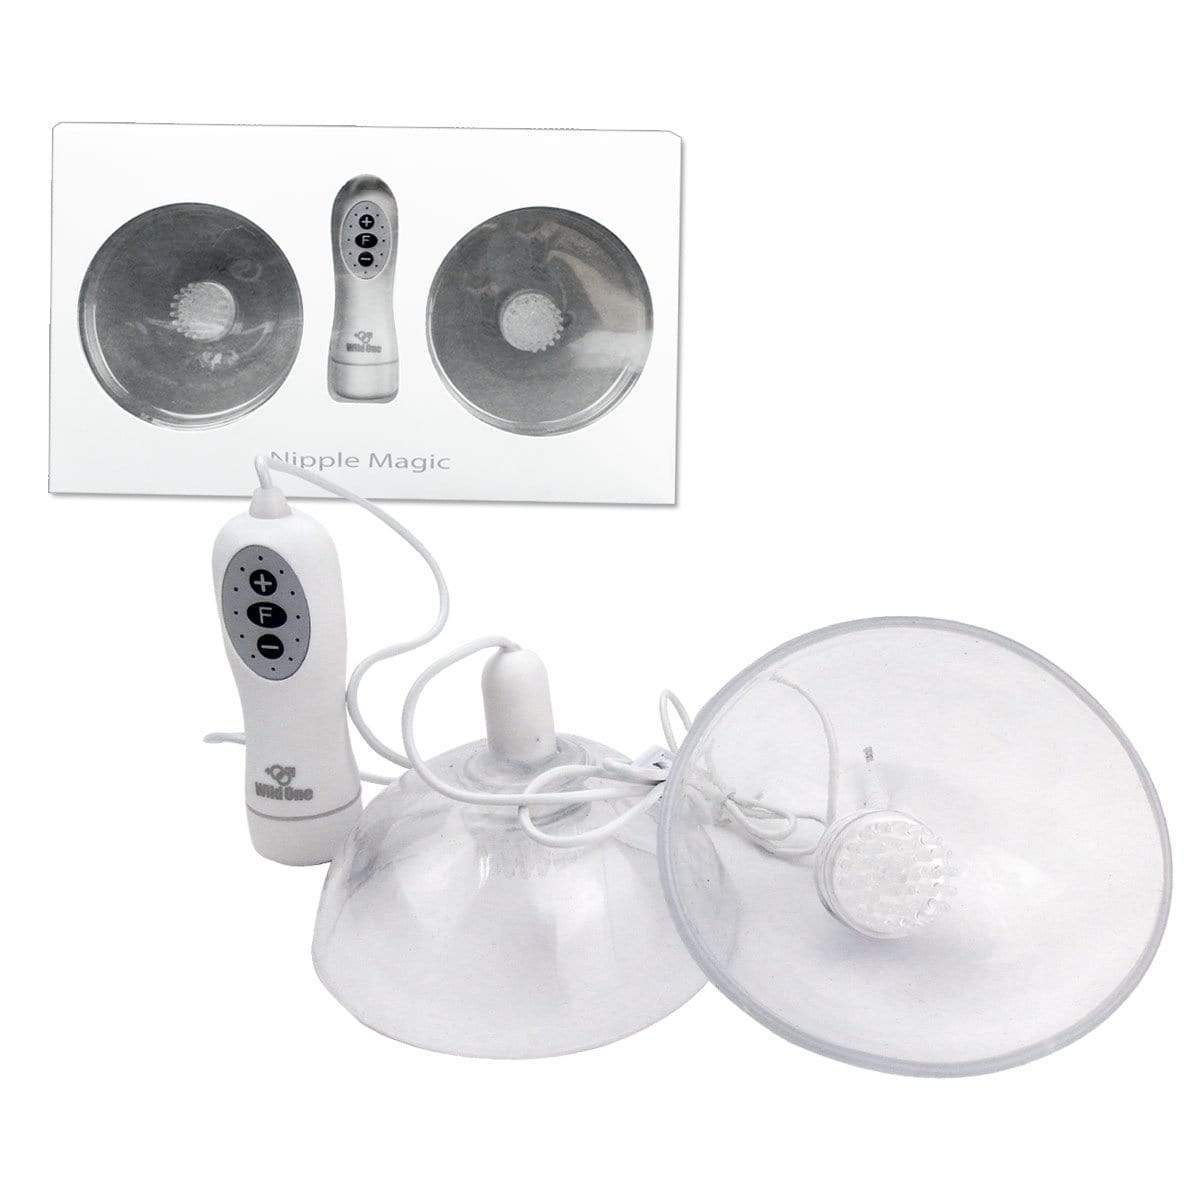 SSI Japan - Nipple Magic Breast Massager (White)    Breast Massager (Vibration) Non Rechargeable